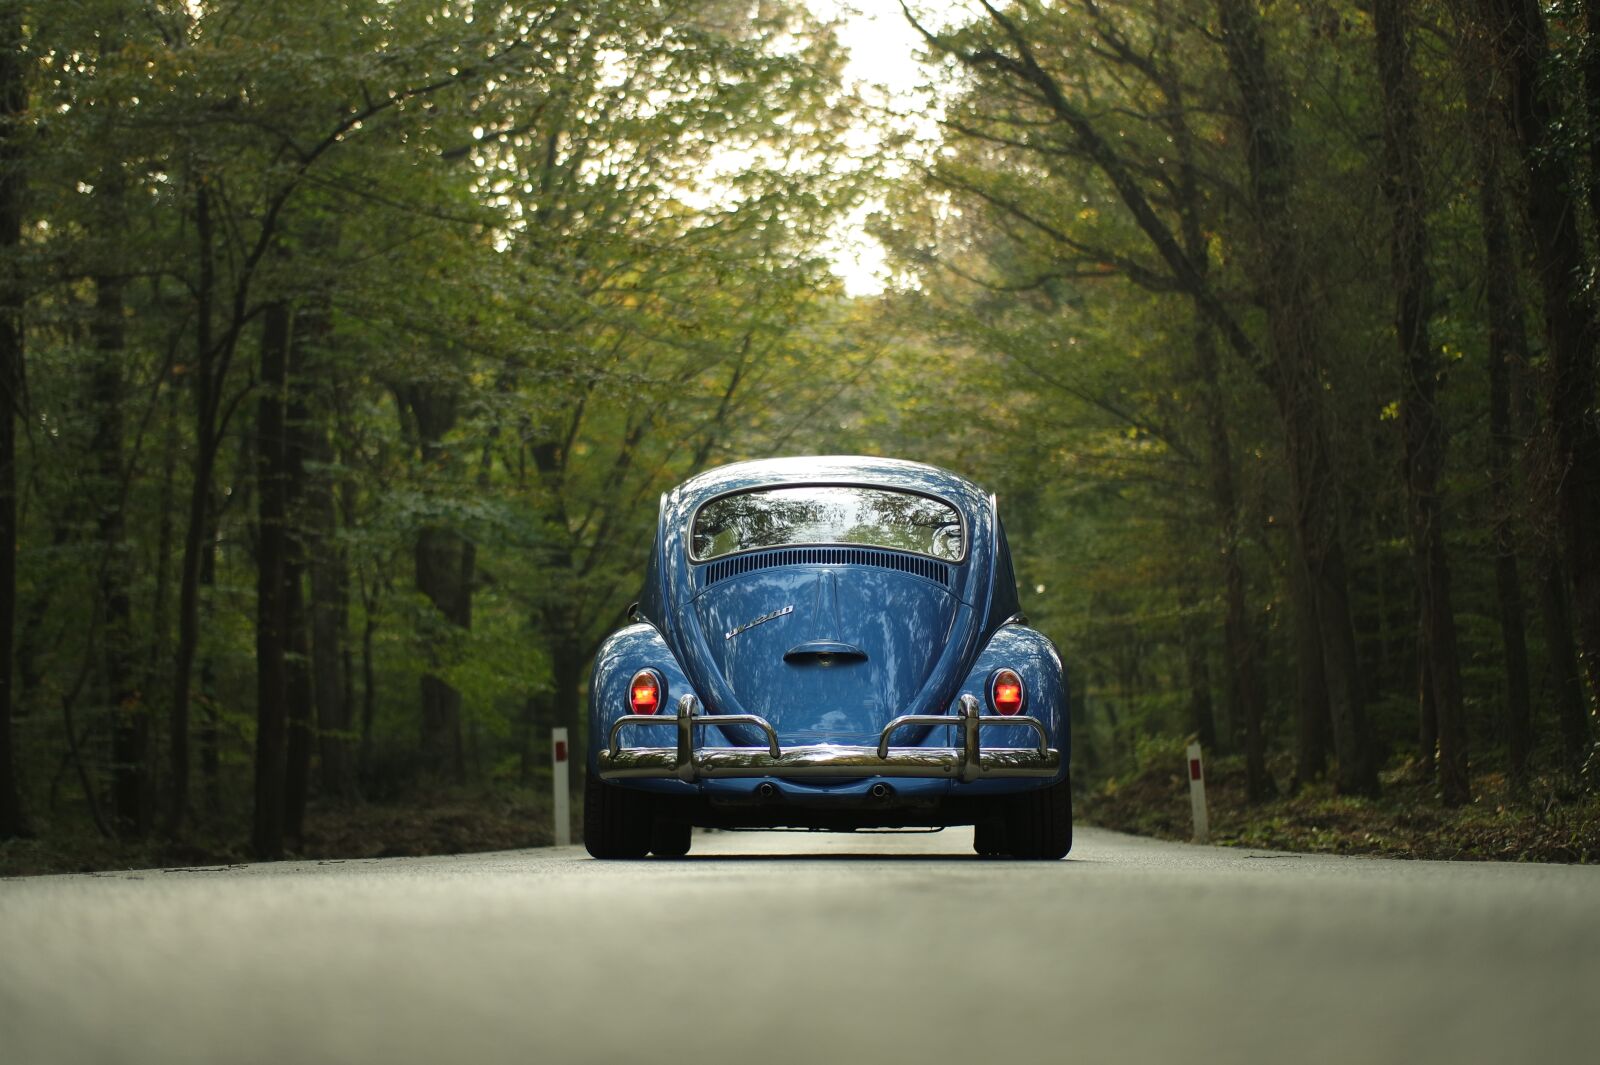 Samsung NX 45mm F1.8 sample photo. Car, classic car, forest photography